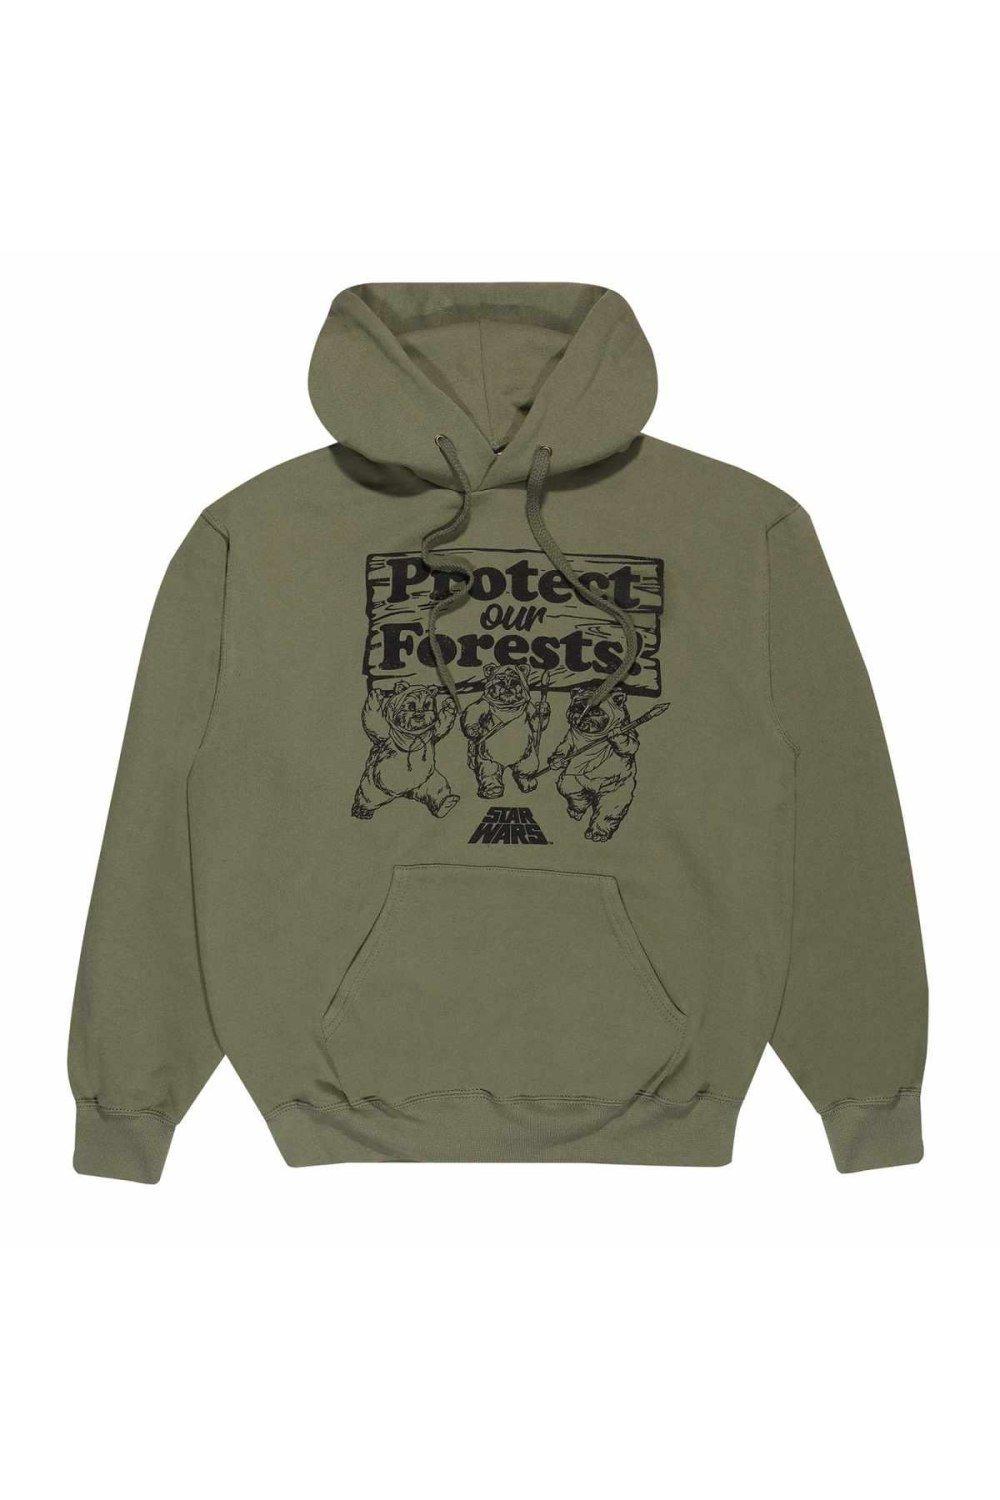 Protect Our Forests Triple Hoodie